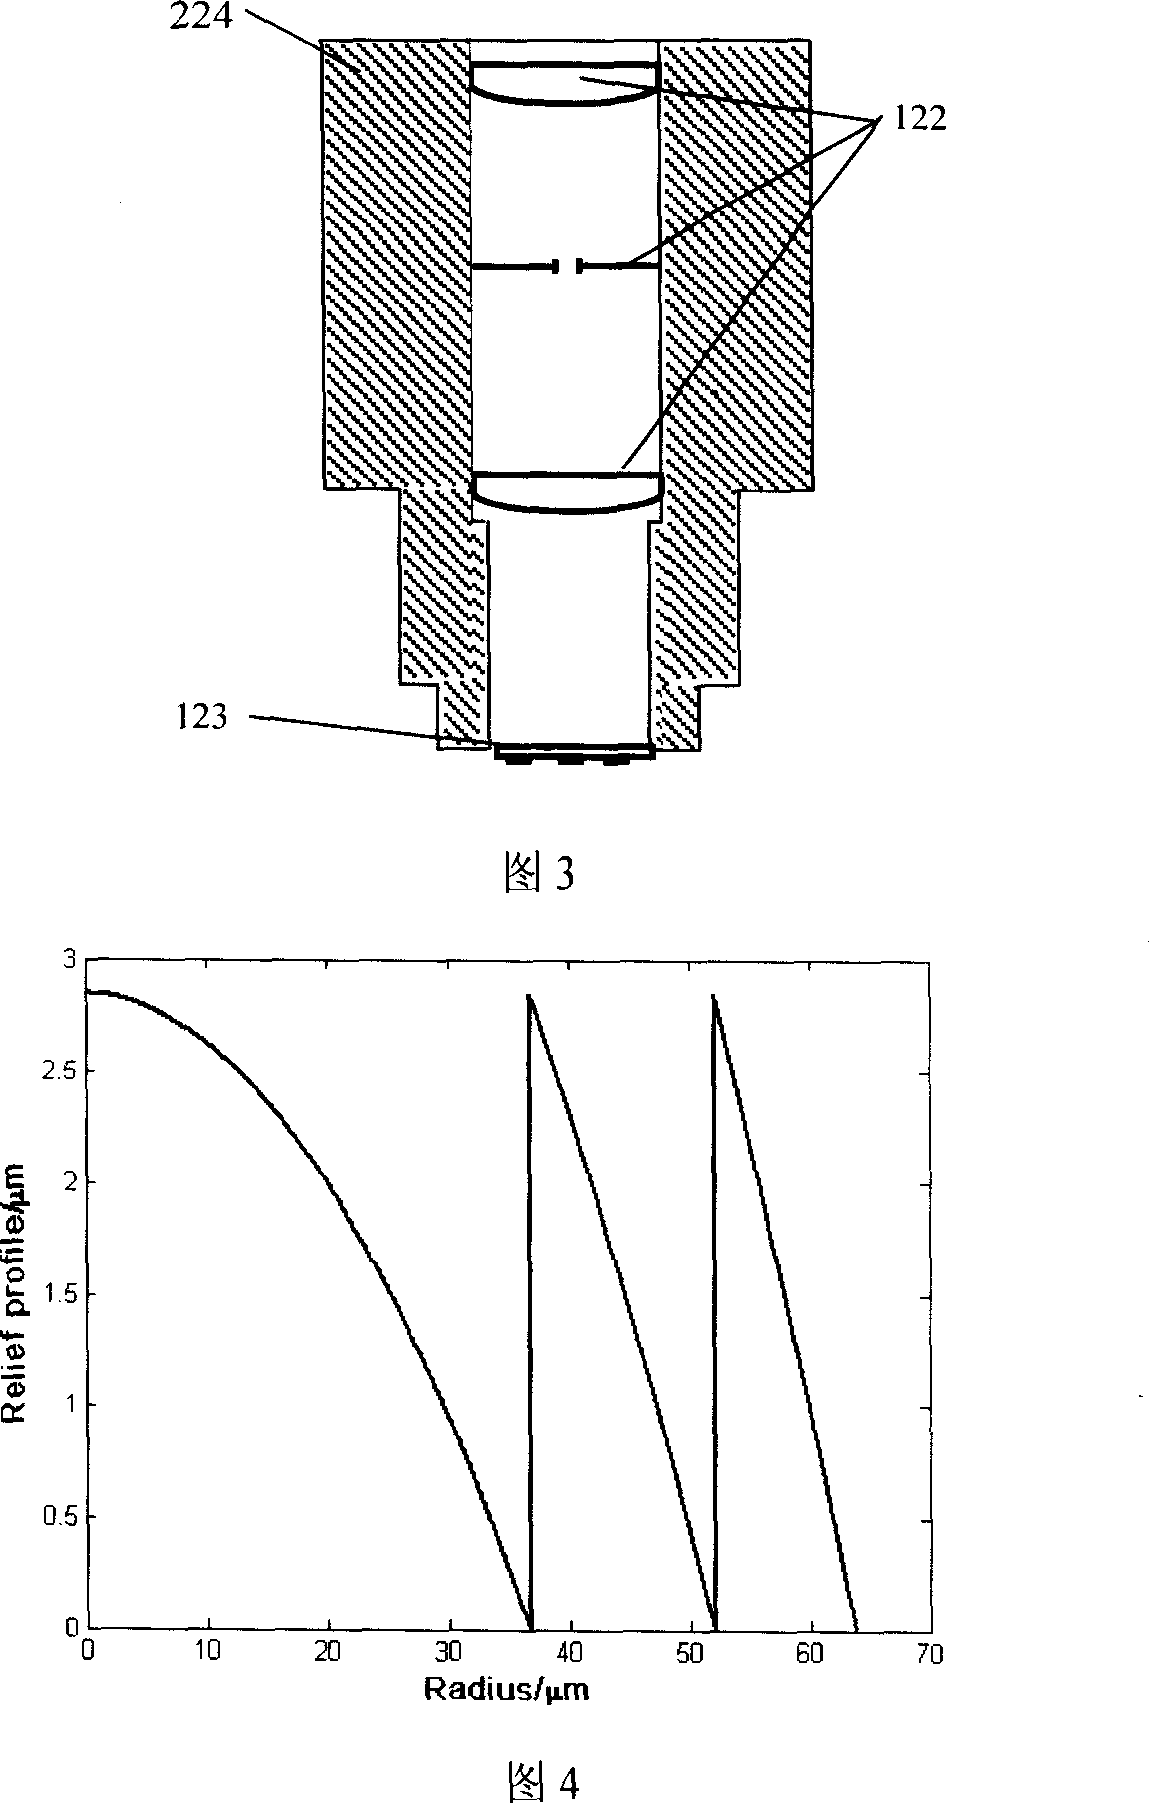 Direct write-in method and apparatus of parallel laser based on harmonic resonance method